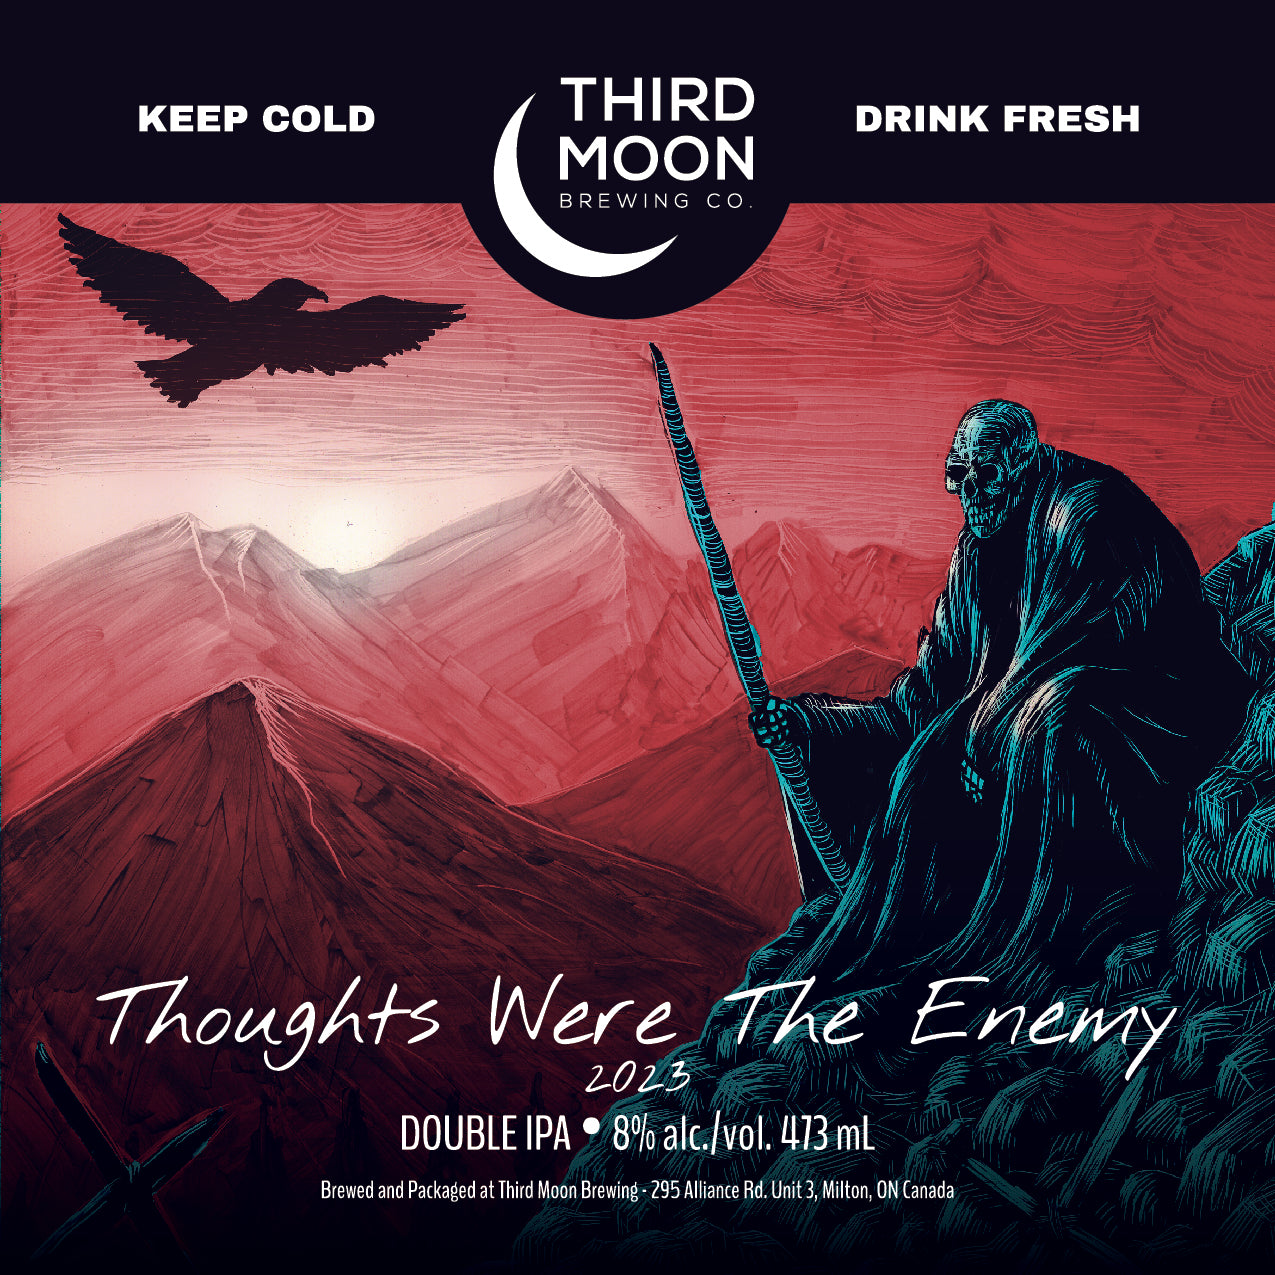 Double IPA - 4-pk of "Thoughts Were The Enemy" tall cans